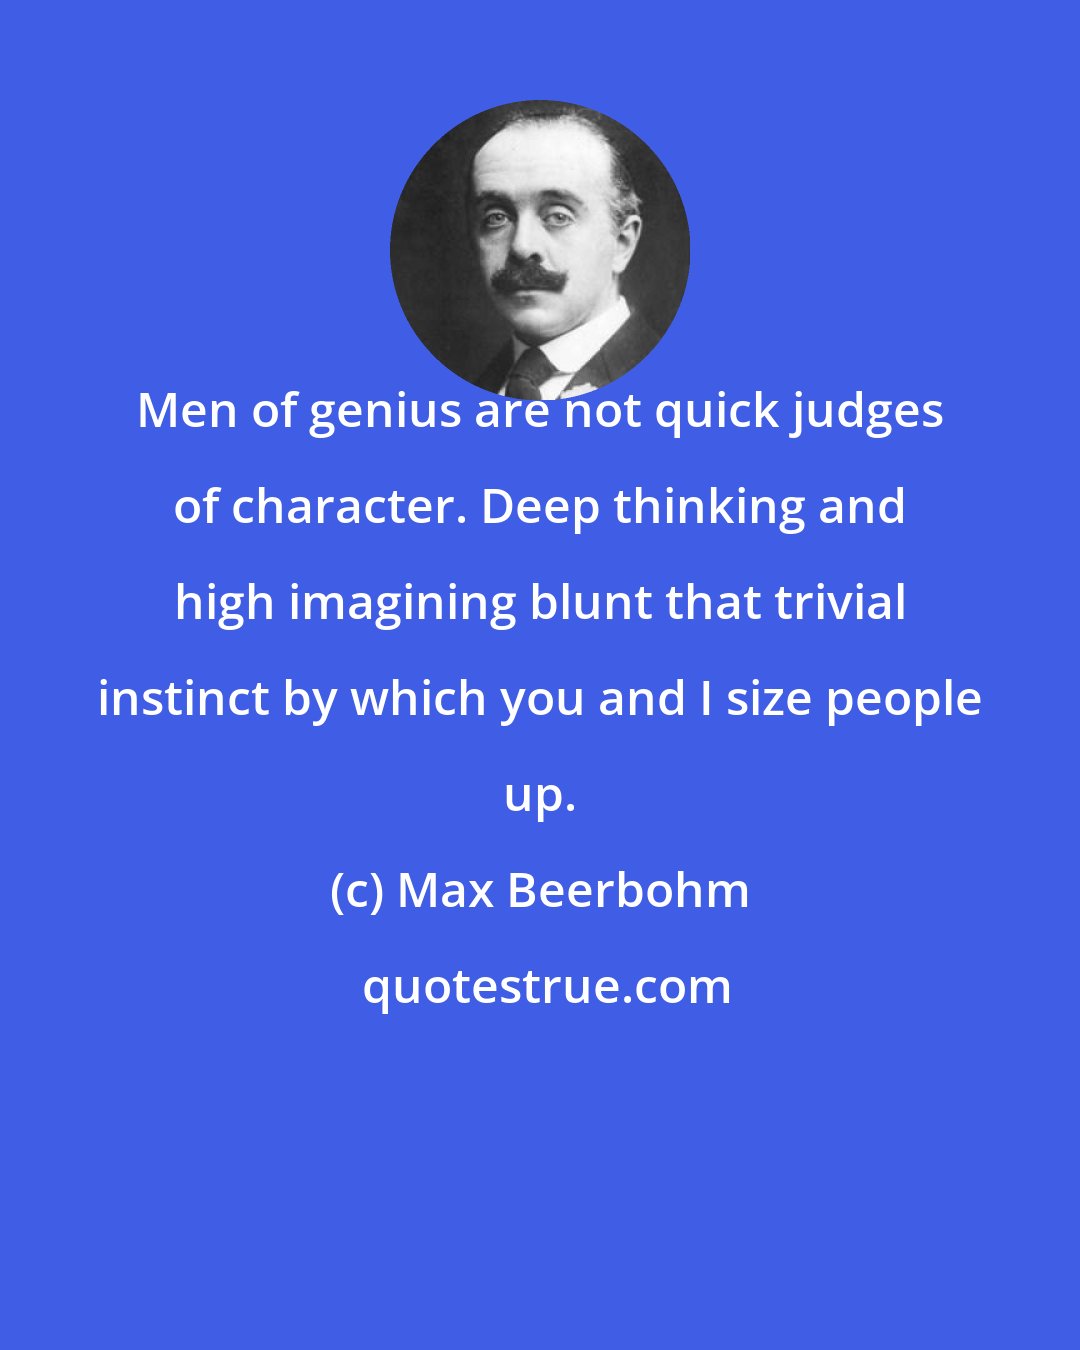 Max Beerbohm: Men of genius are not quick judges of character. Deep thinking and high imagining blunt that trivial instinct by which you and I size people up.